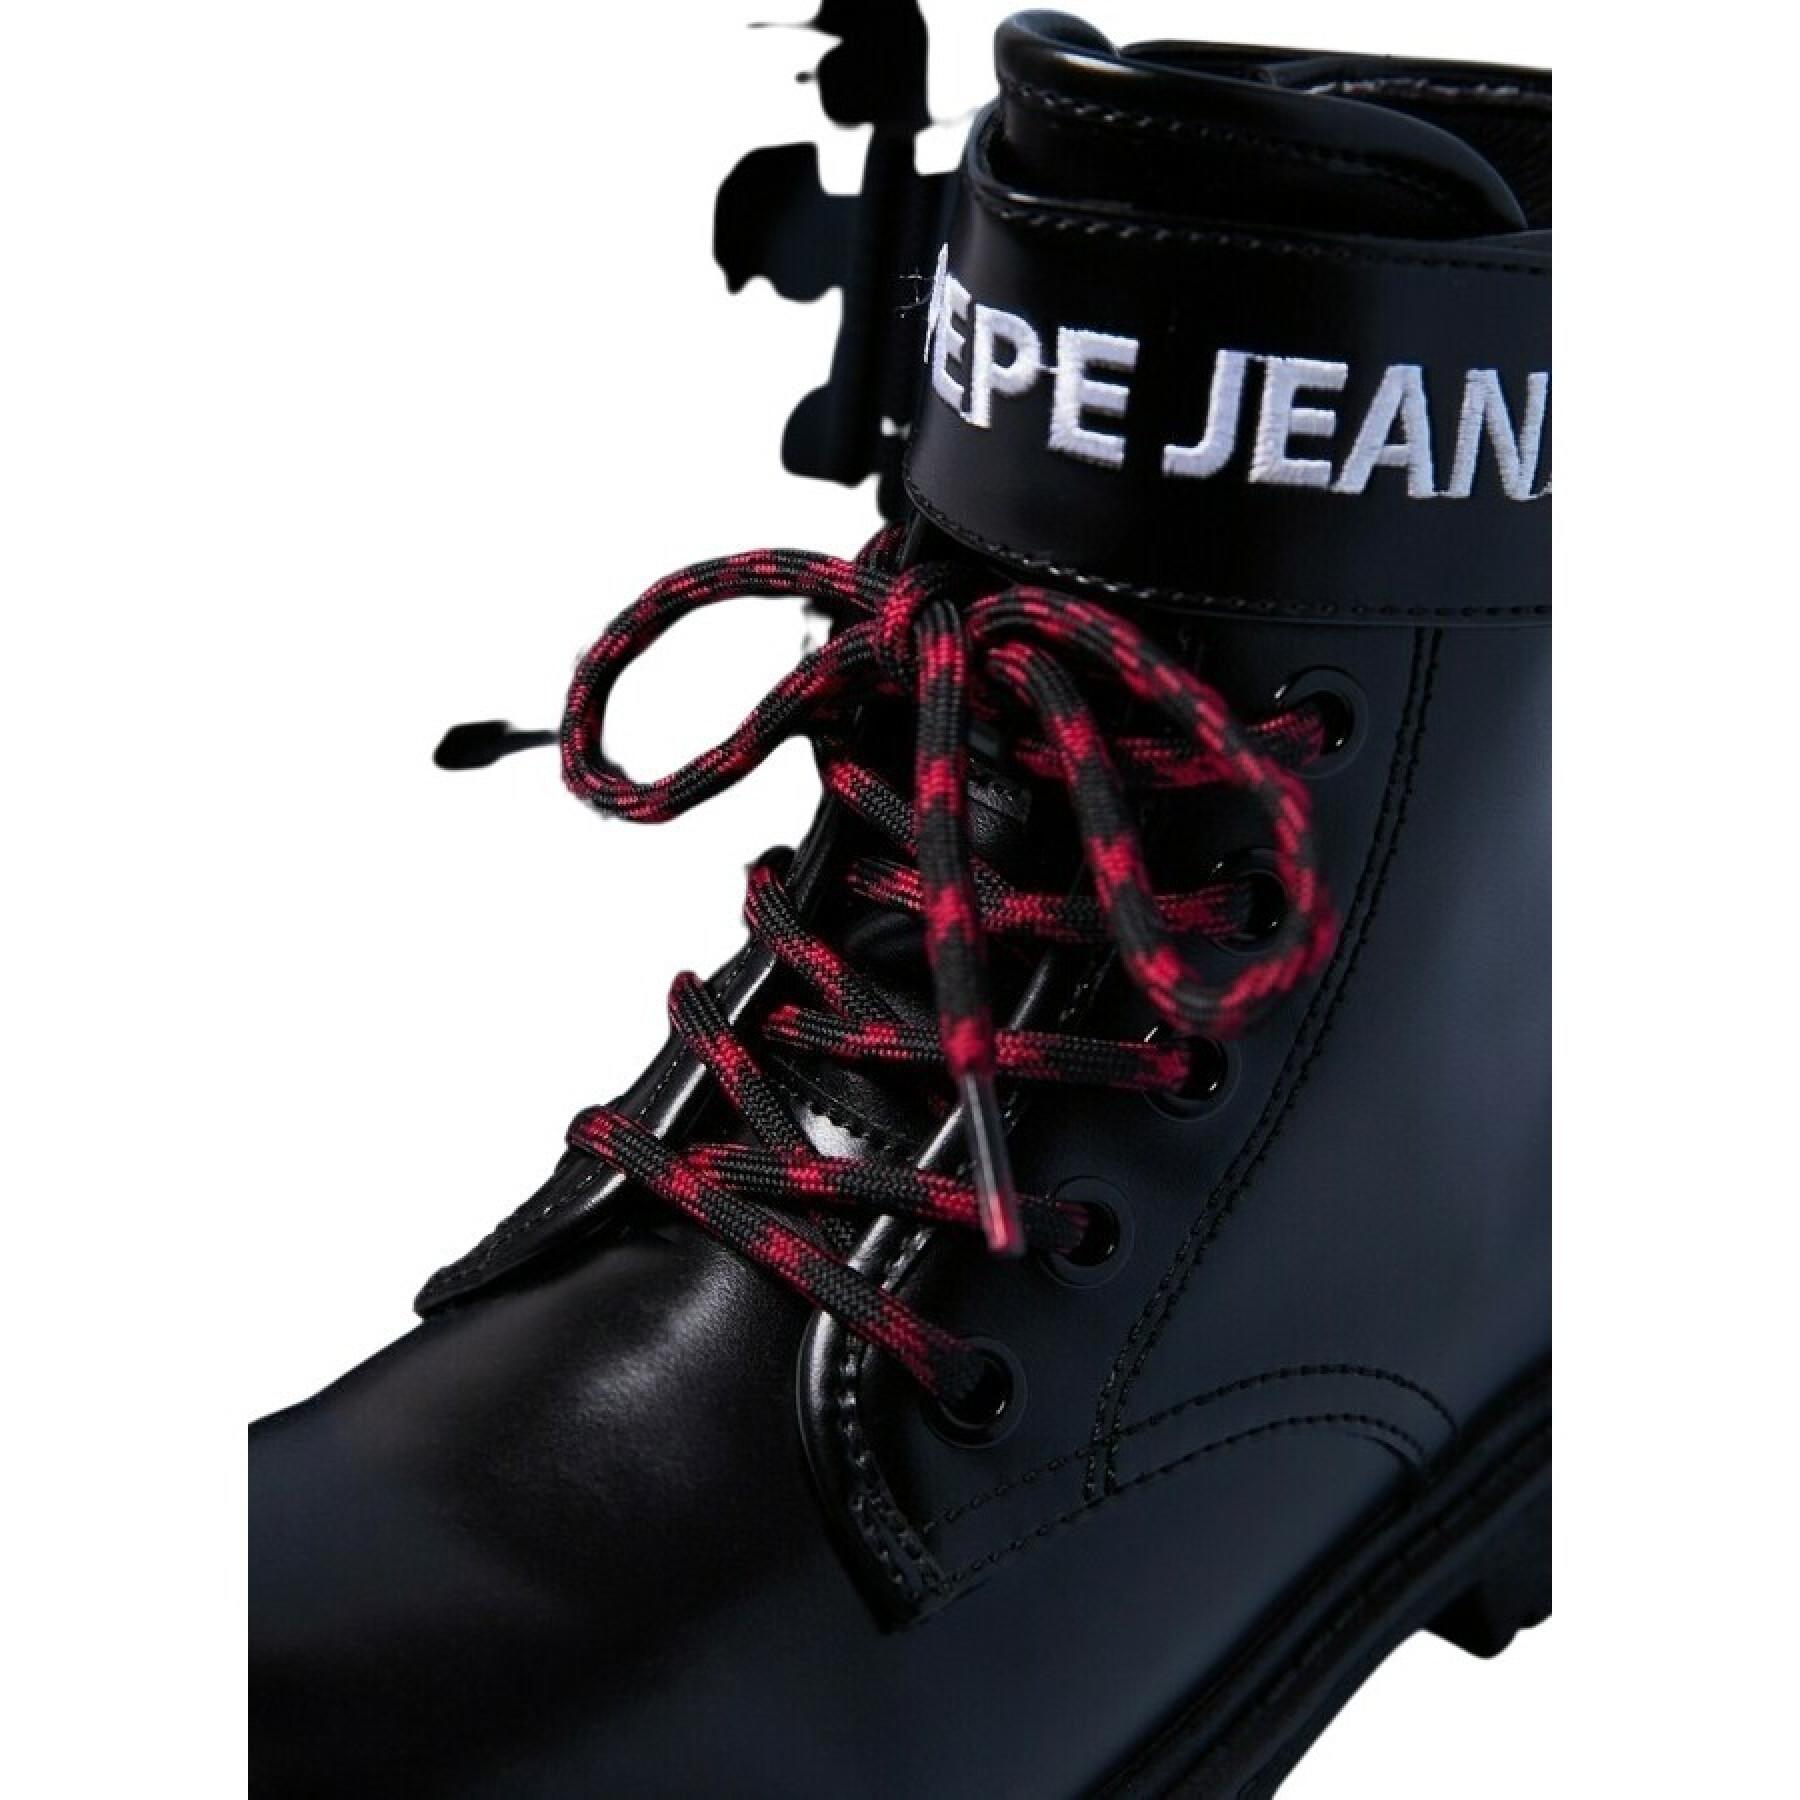 Girl's boots Pepe Jeans Hatton Strap Combi